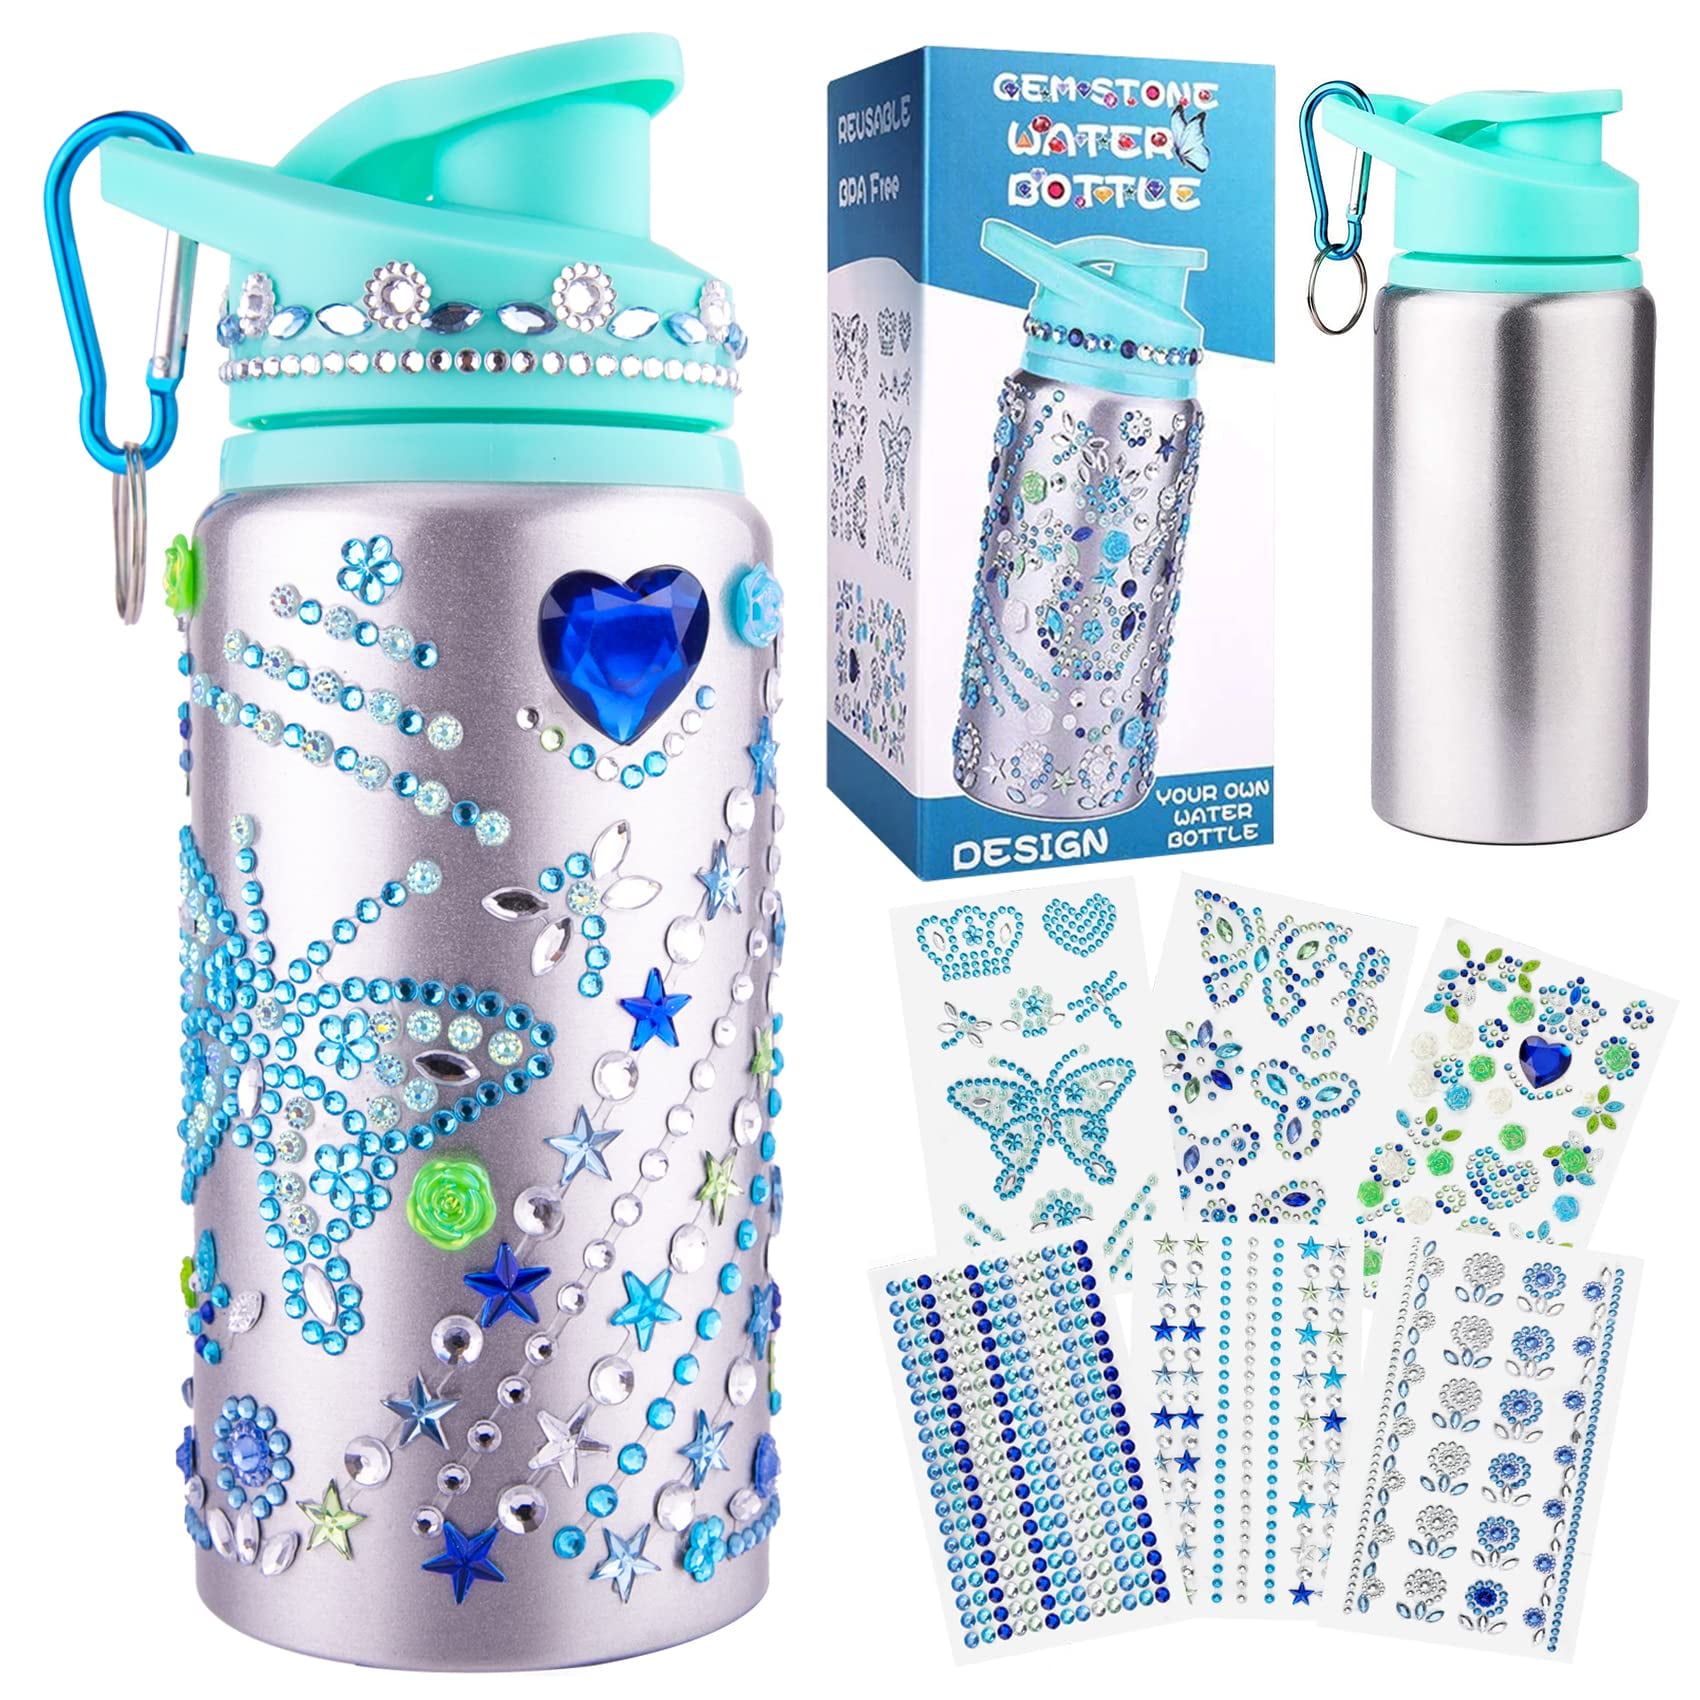 DECORATE YOUR OWN GEMSTONE WATER BOTTLE CRAFT KIT - The Toy Insider